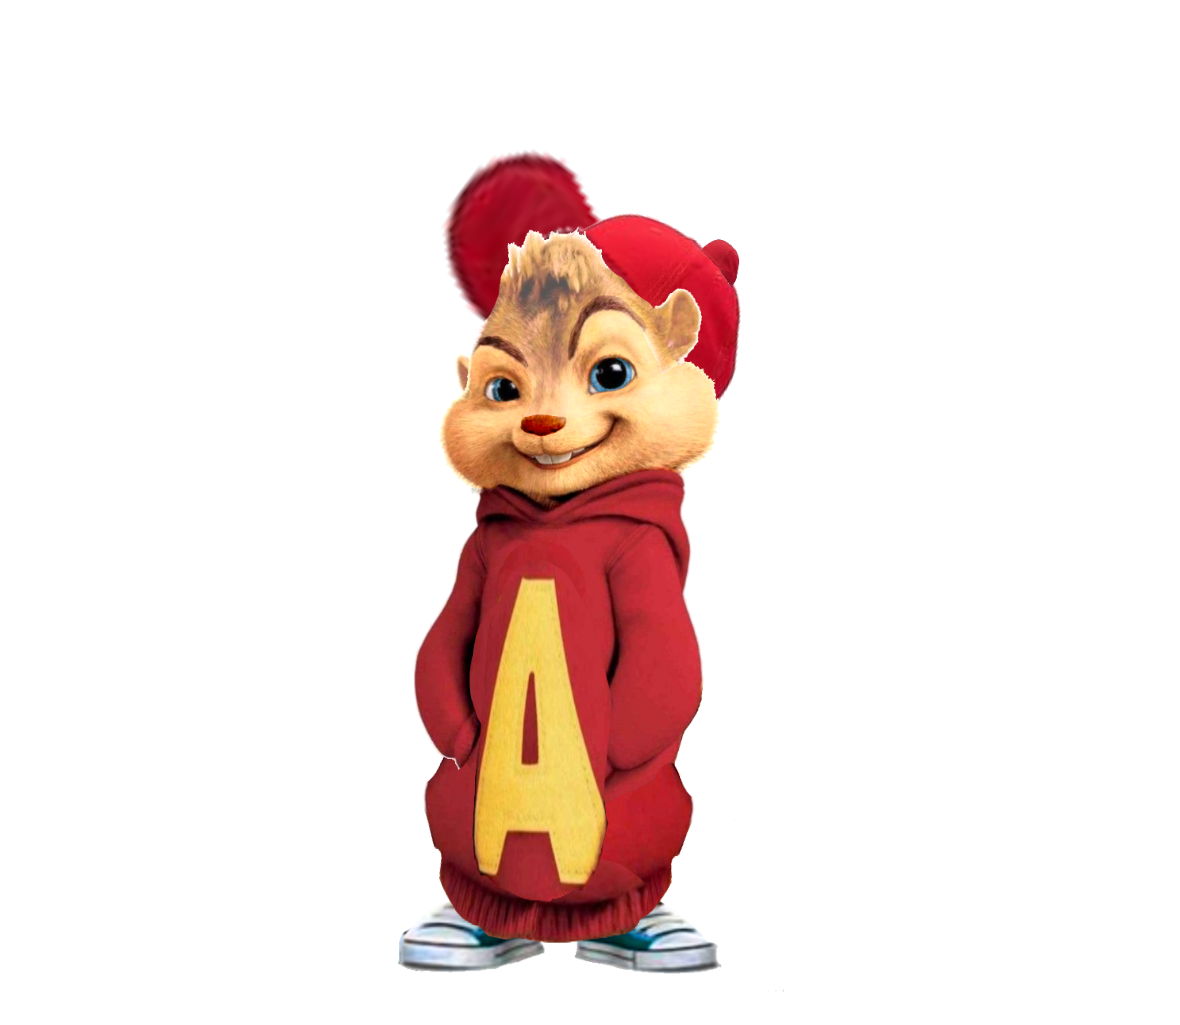 Premium AI Image  A cartoon character from the movie alvin and the  chipmunks